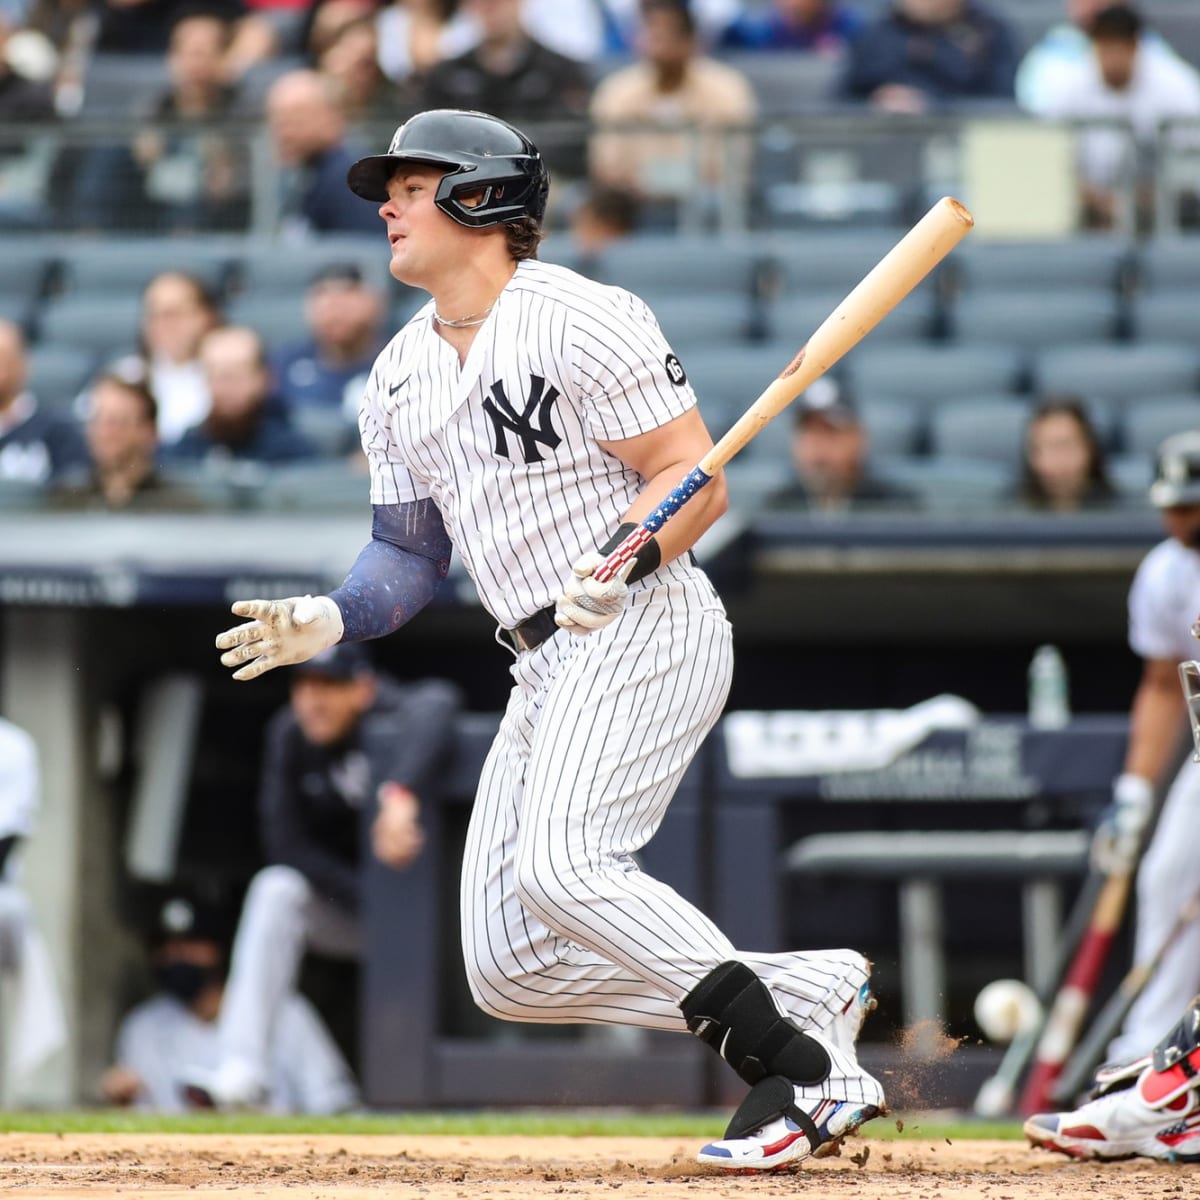 New York Yankees nearly traded first baseman Luke Voit - Sports Illustrated  NY Yankees News, Analysis and More